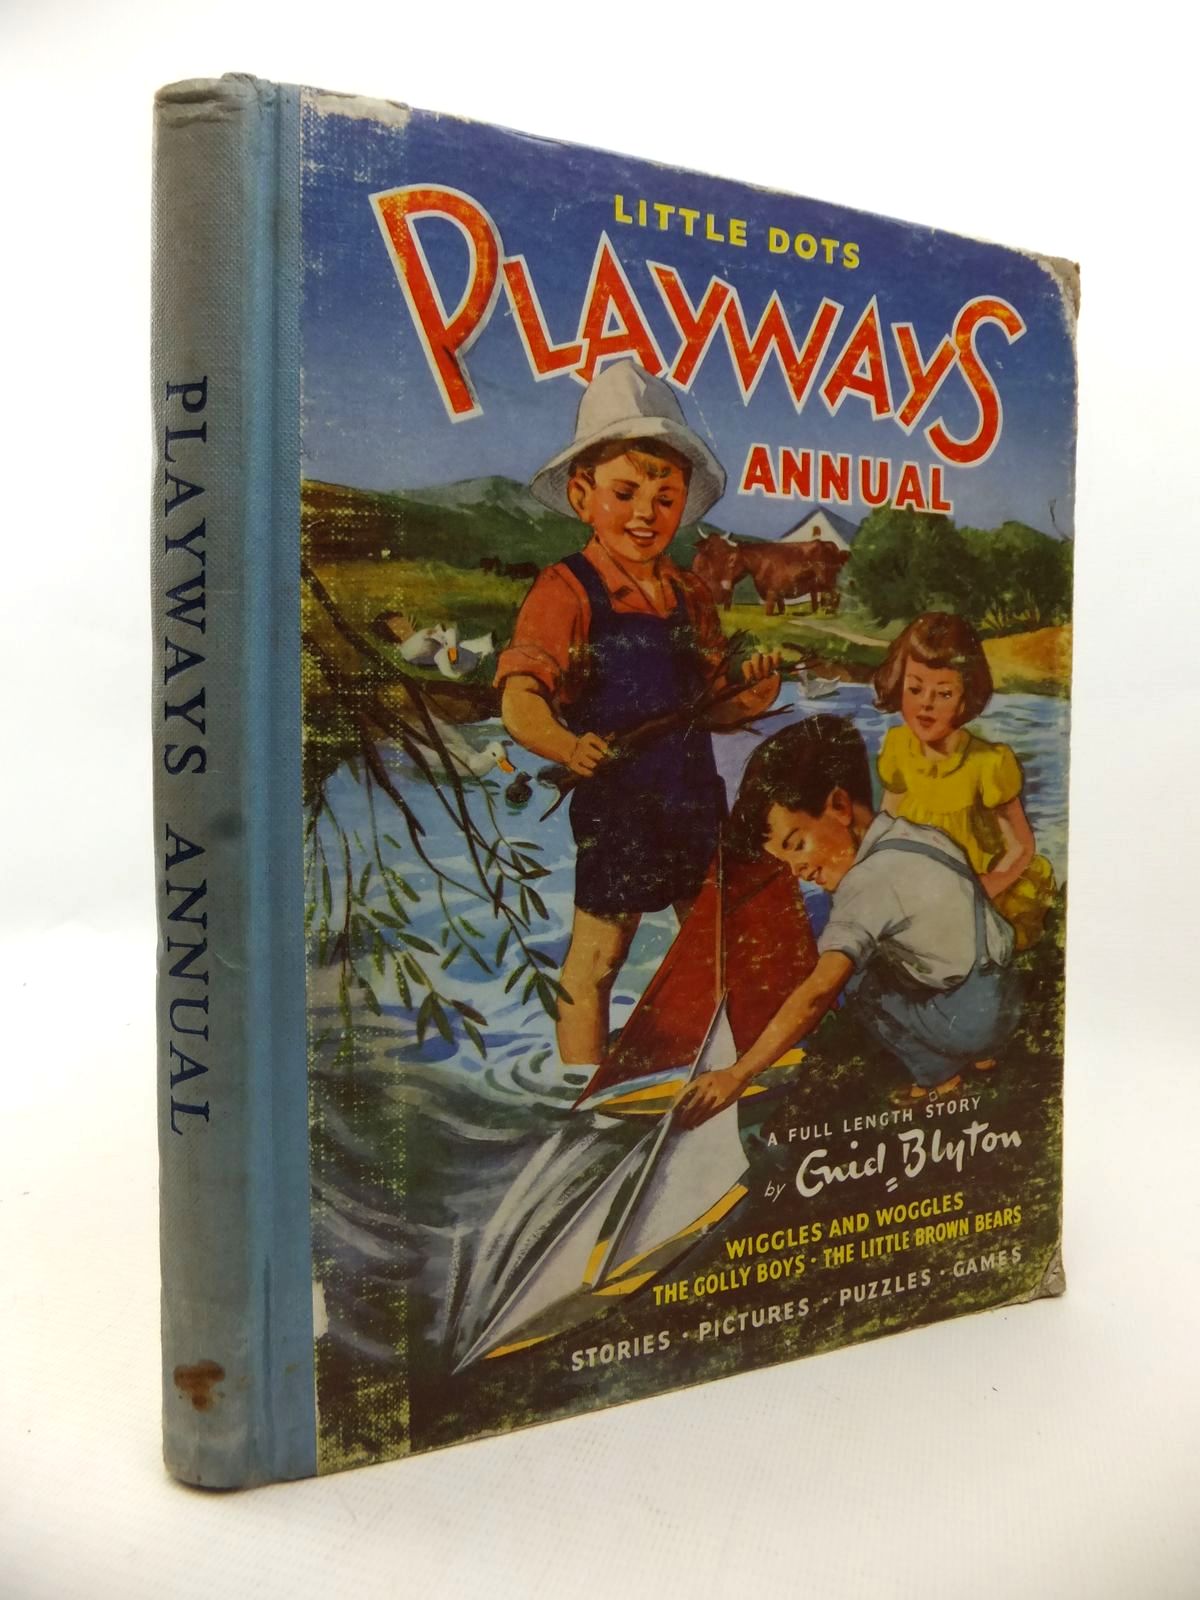 Photo of PLAYWAYS ANNUAL written by Blyton, Enid et al, published by Playways Office (STOCK CODE: 1813337)  for sale by Stella & Rose's Books